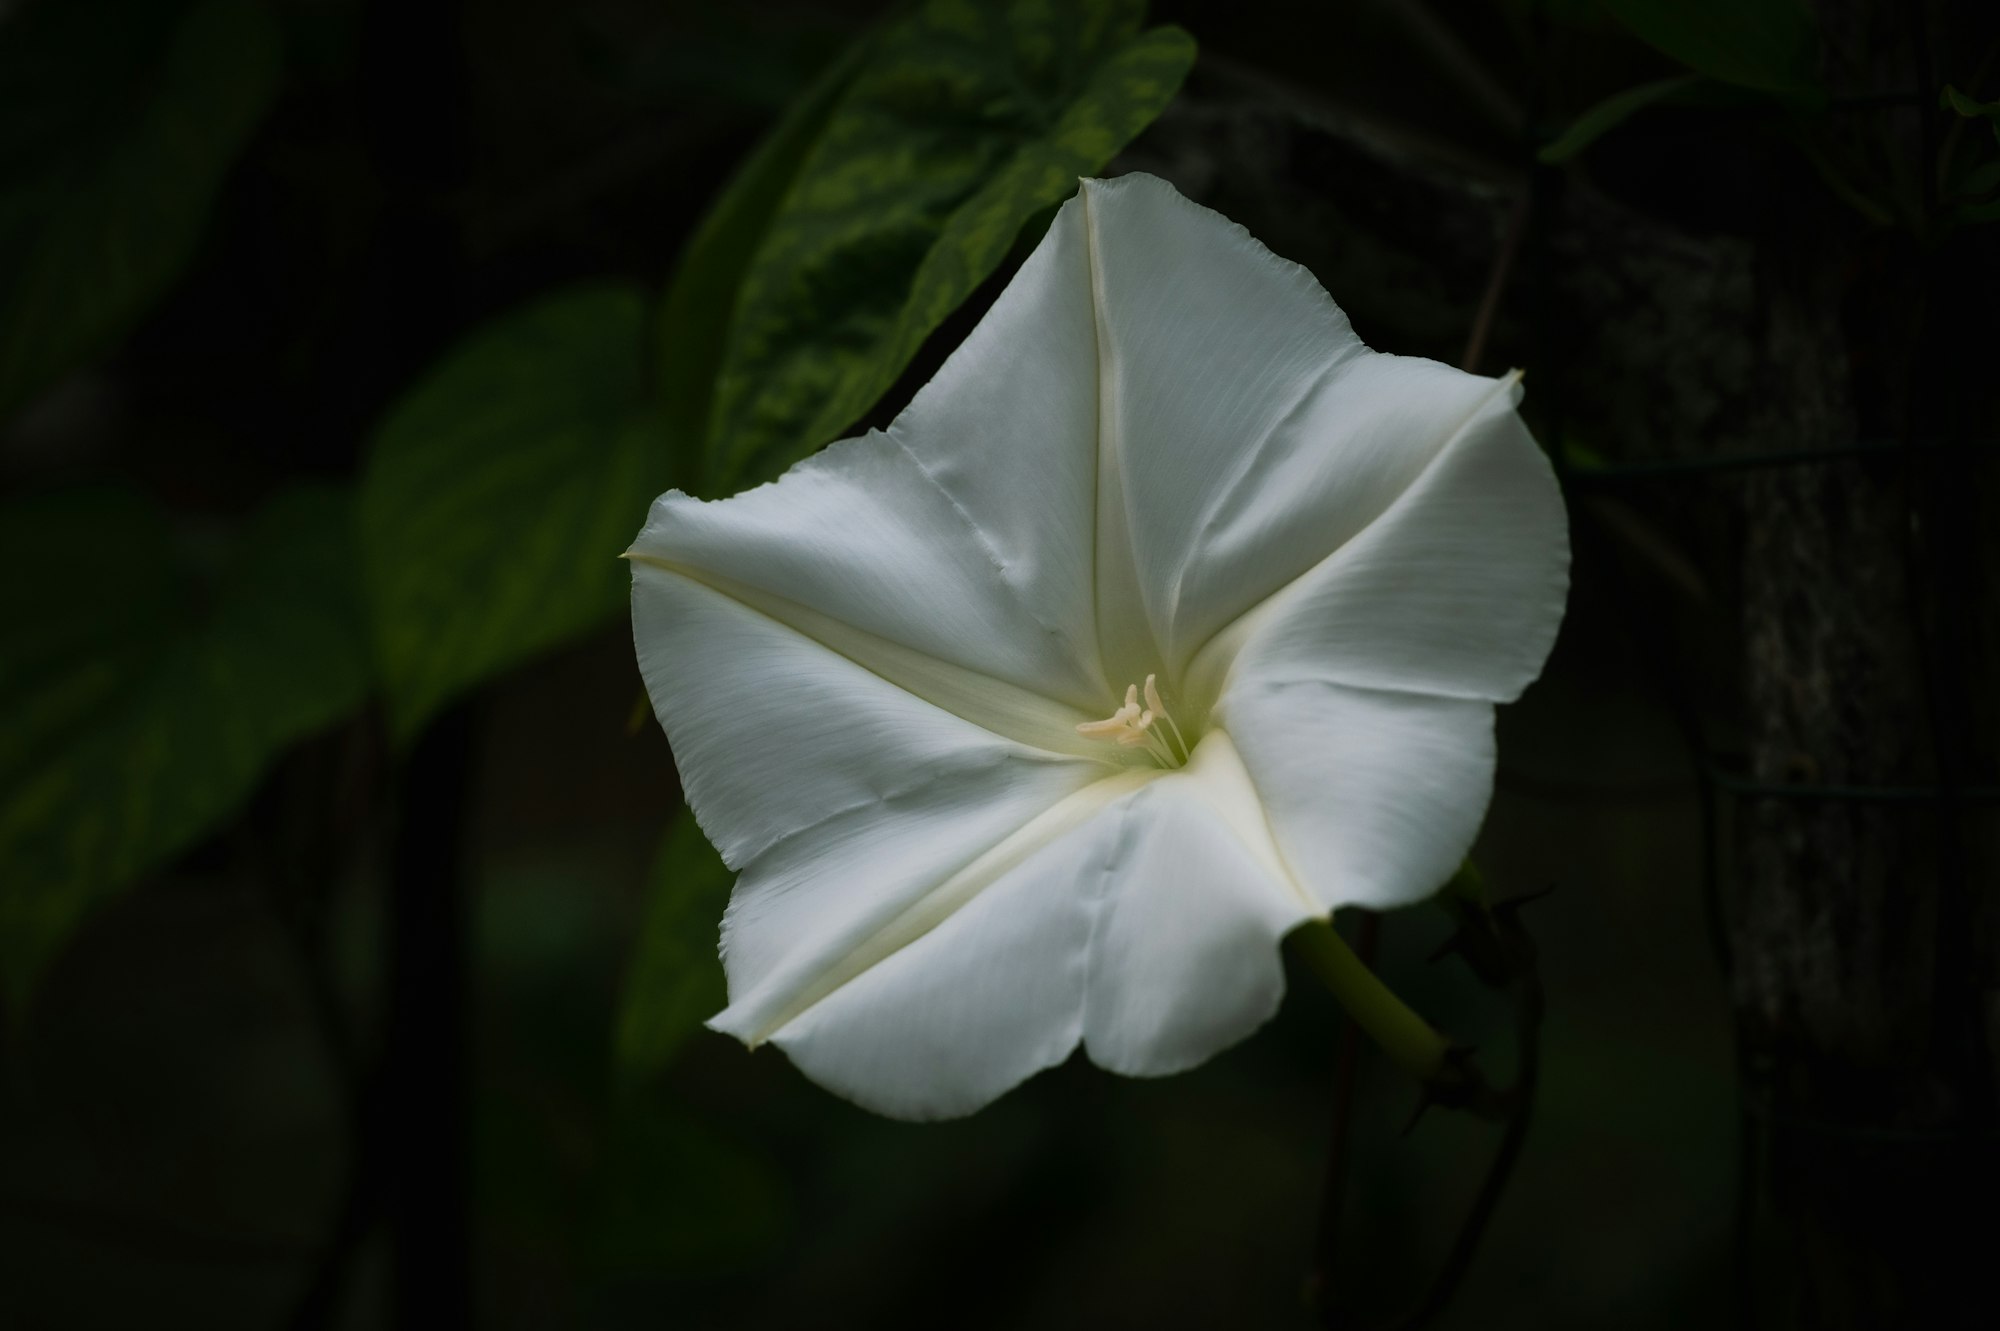 A moonflower blooms at twilight.